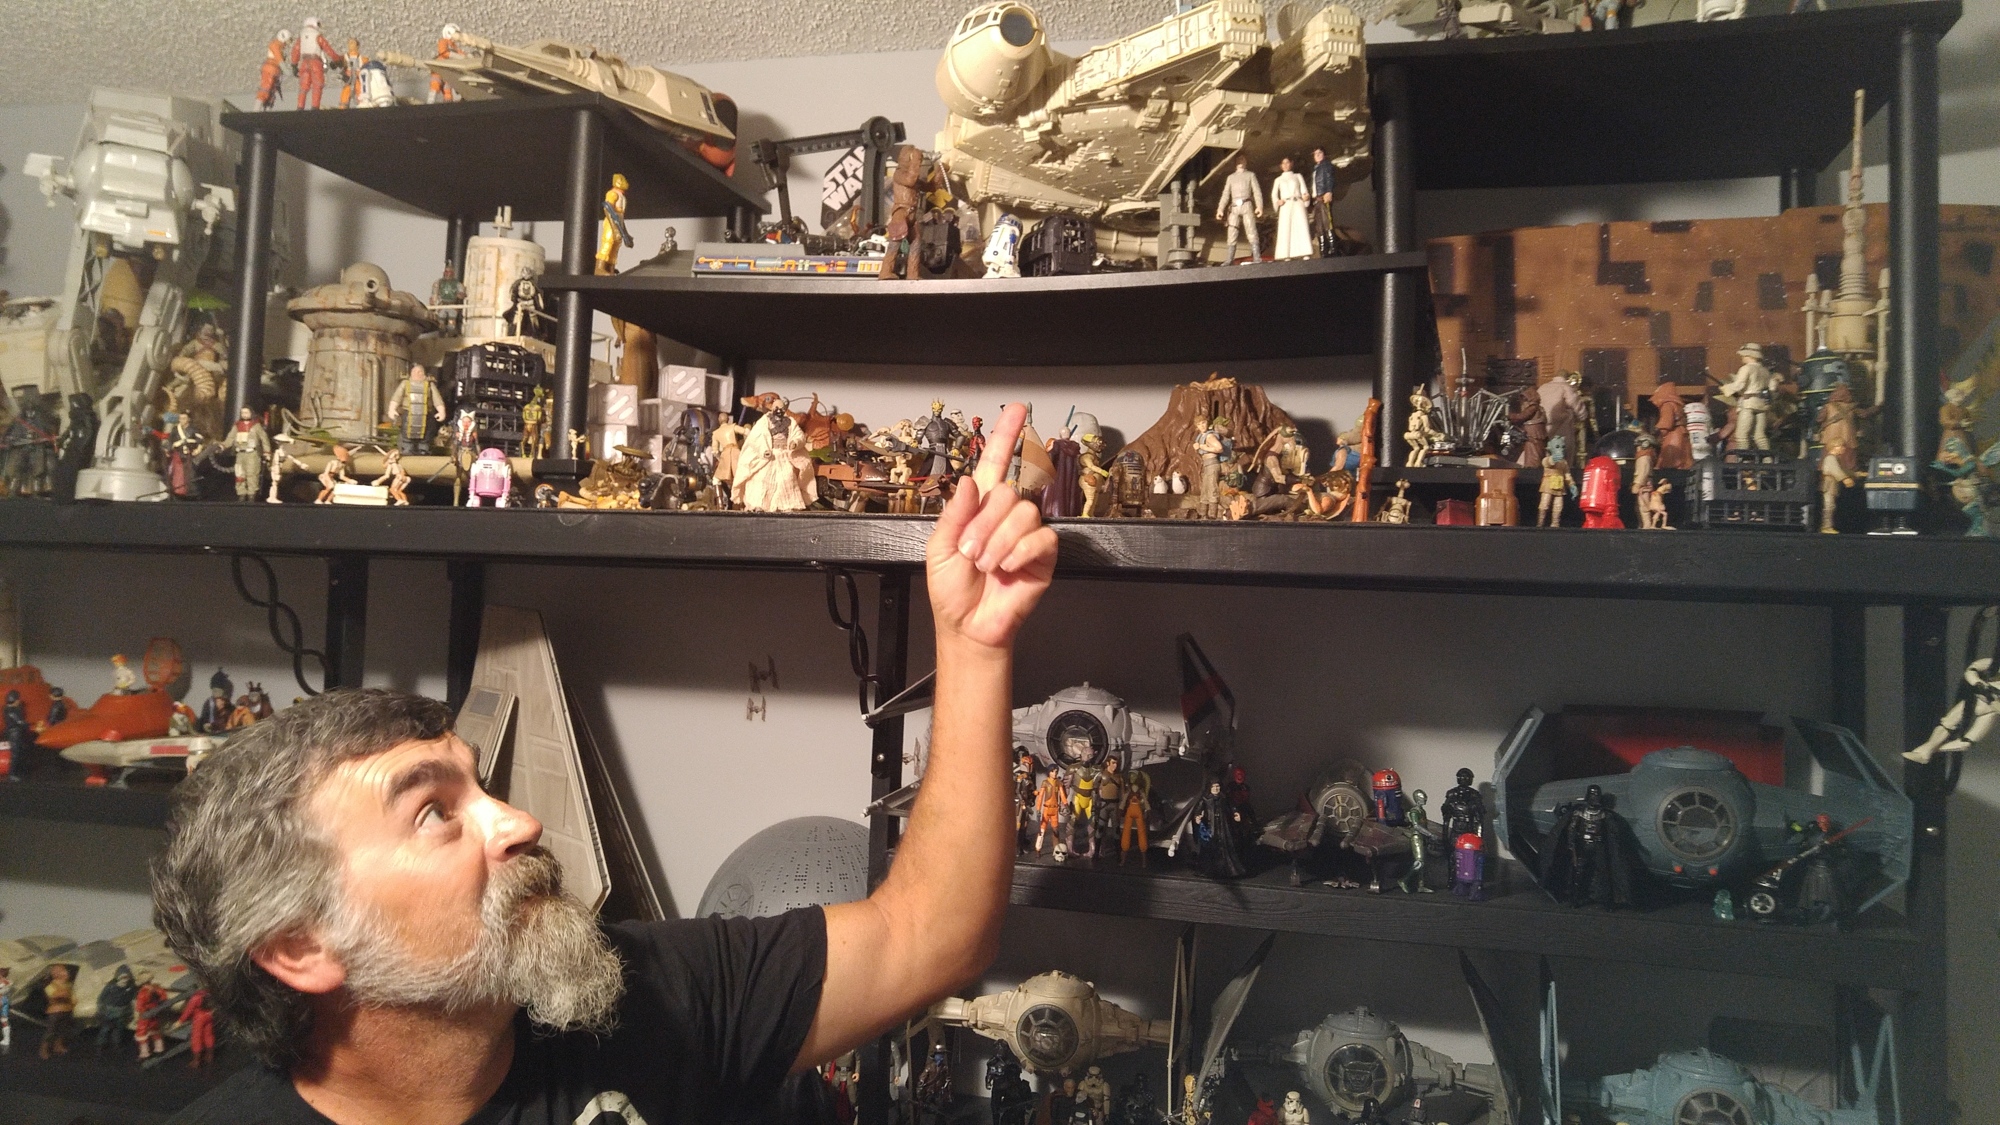 DeDeo points to the Millennium Falcon model on a shelf in his Star Wars room. Photo by Brent Woronoff